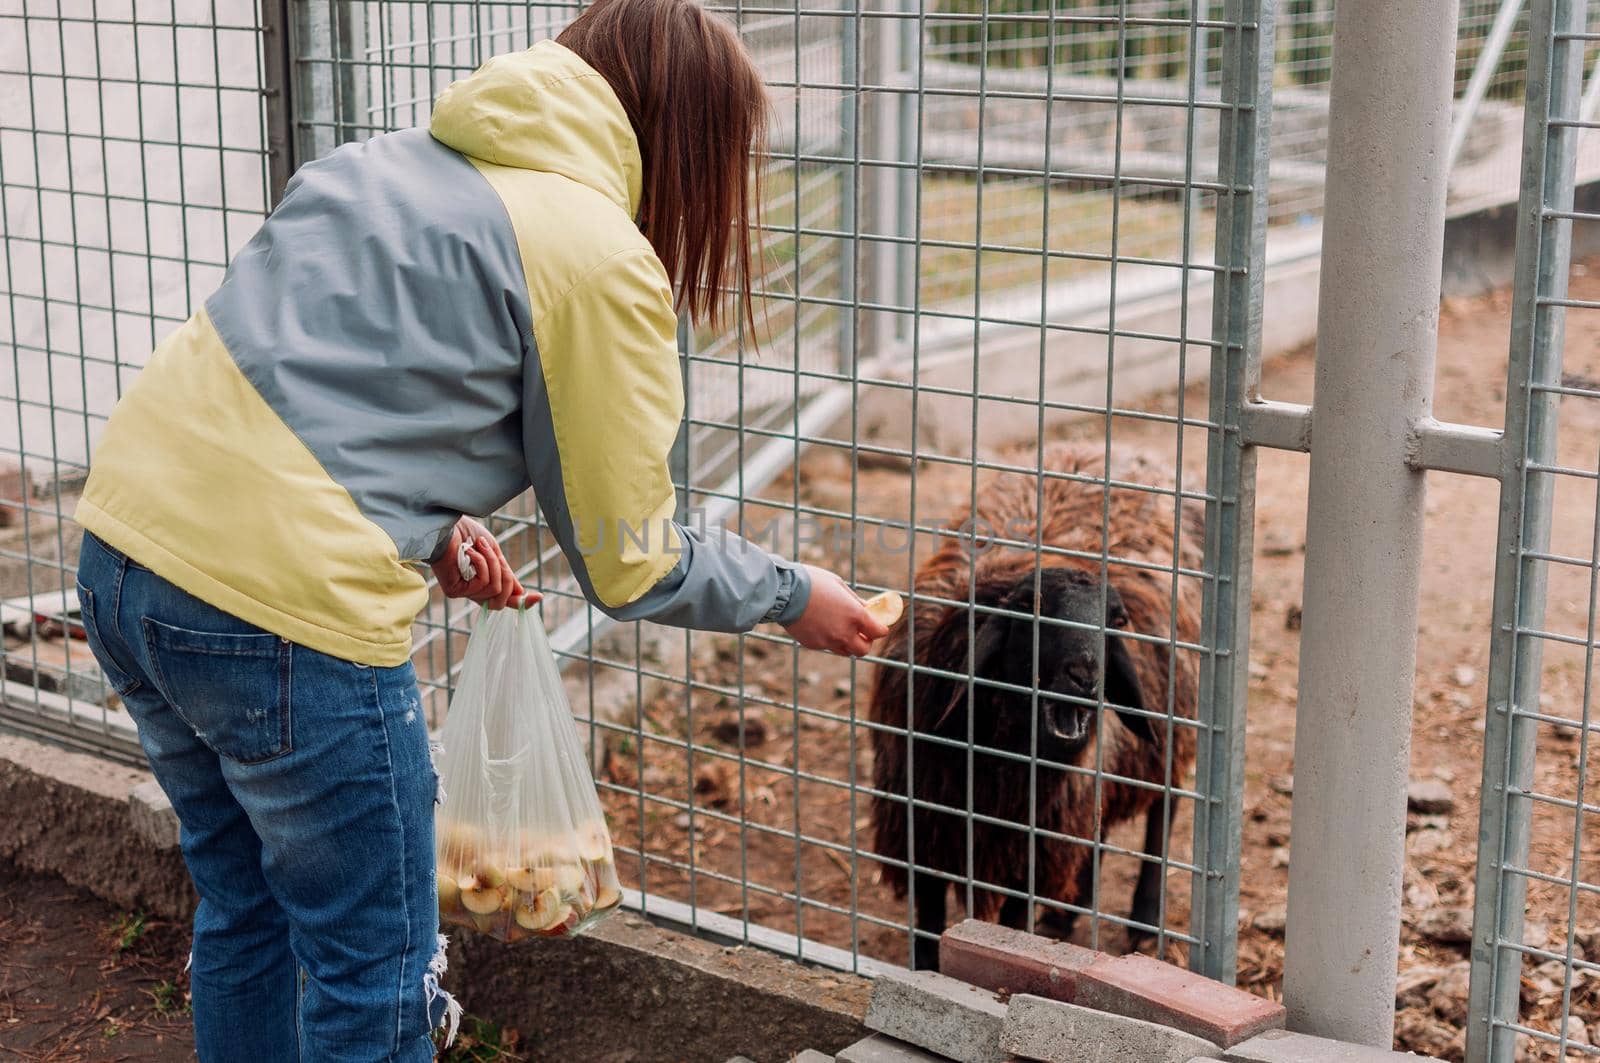 Girl feeds a brown sheep.Animal eats apples through a net in a cage.Mammal is in a zoo.Horizontal photo.Selective focus. by Alla_Morozova93